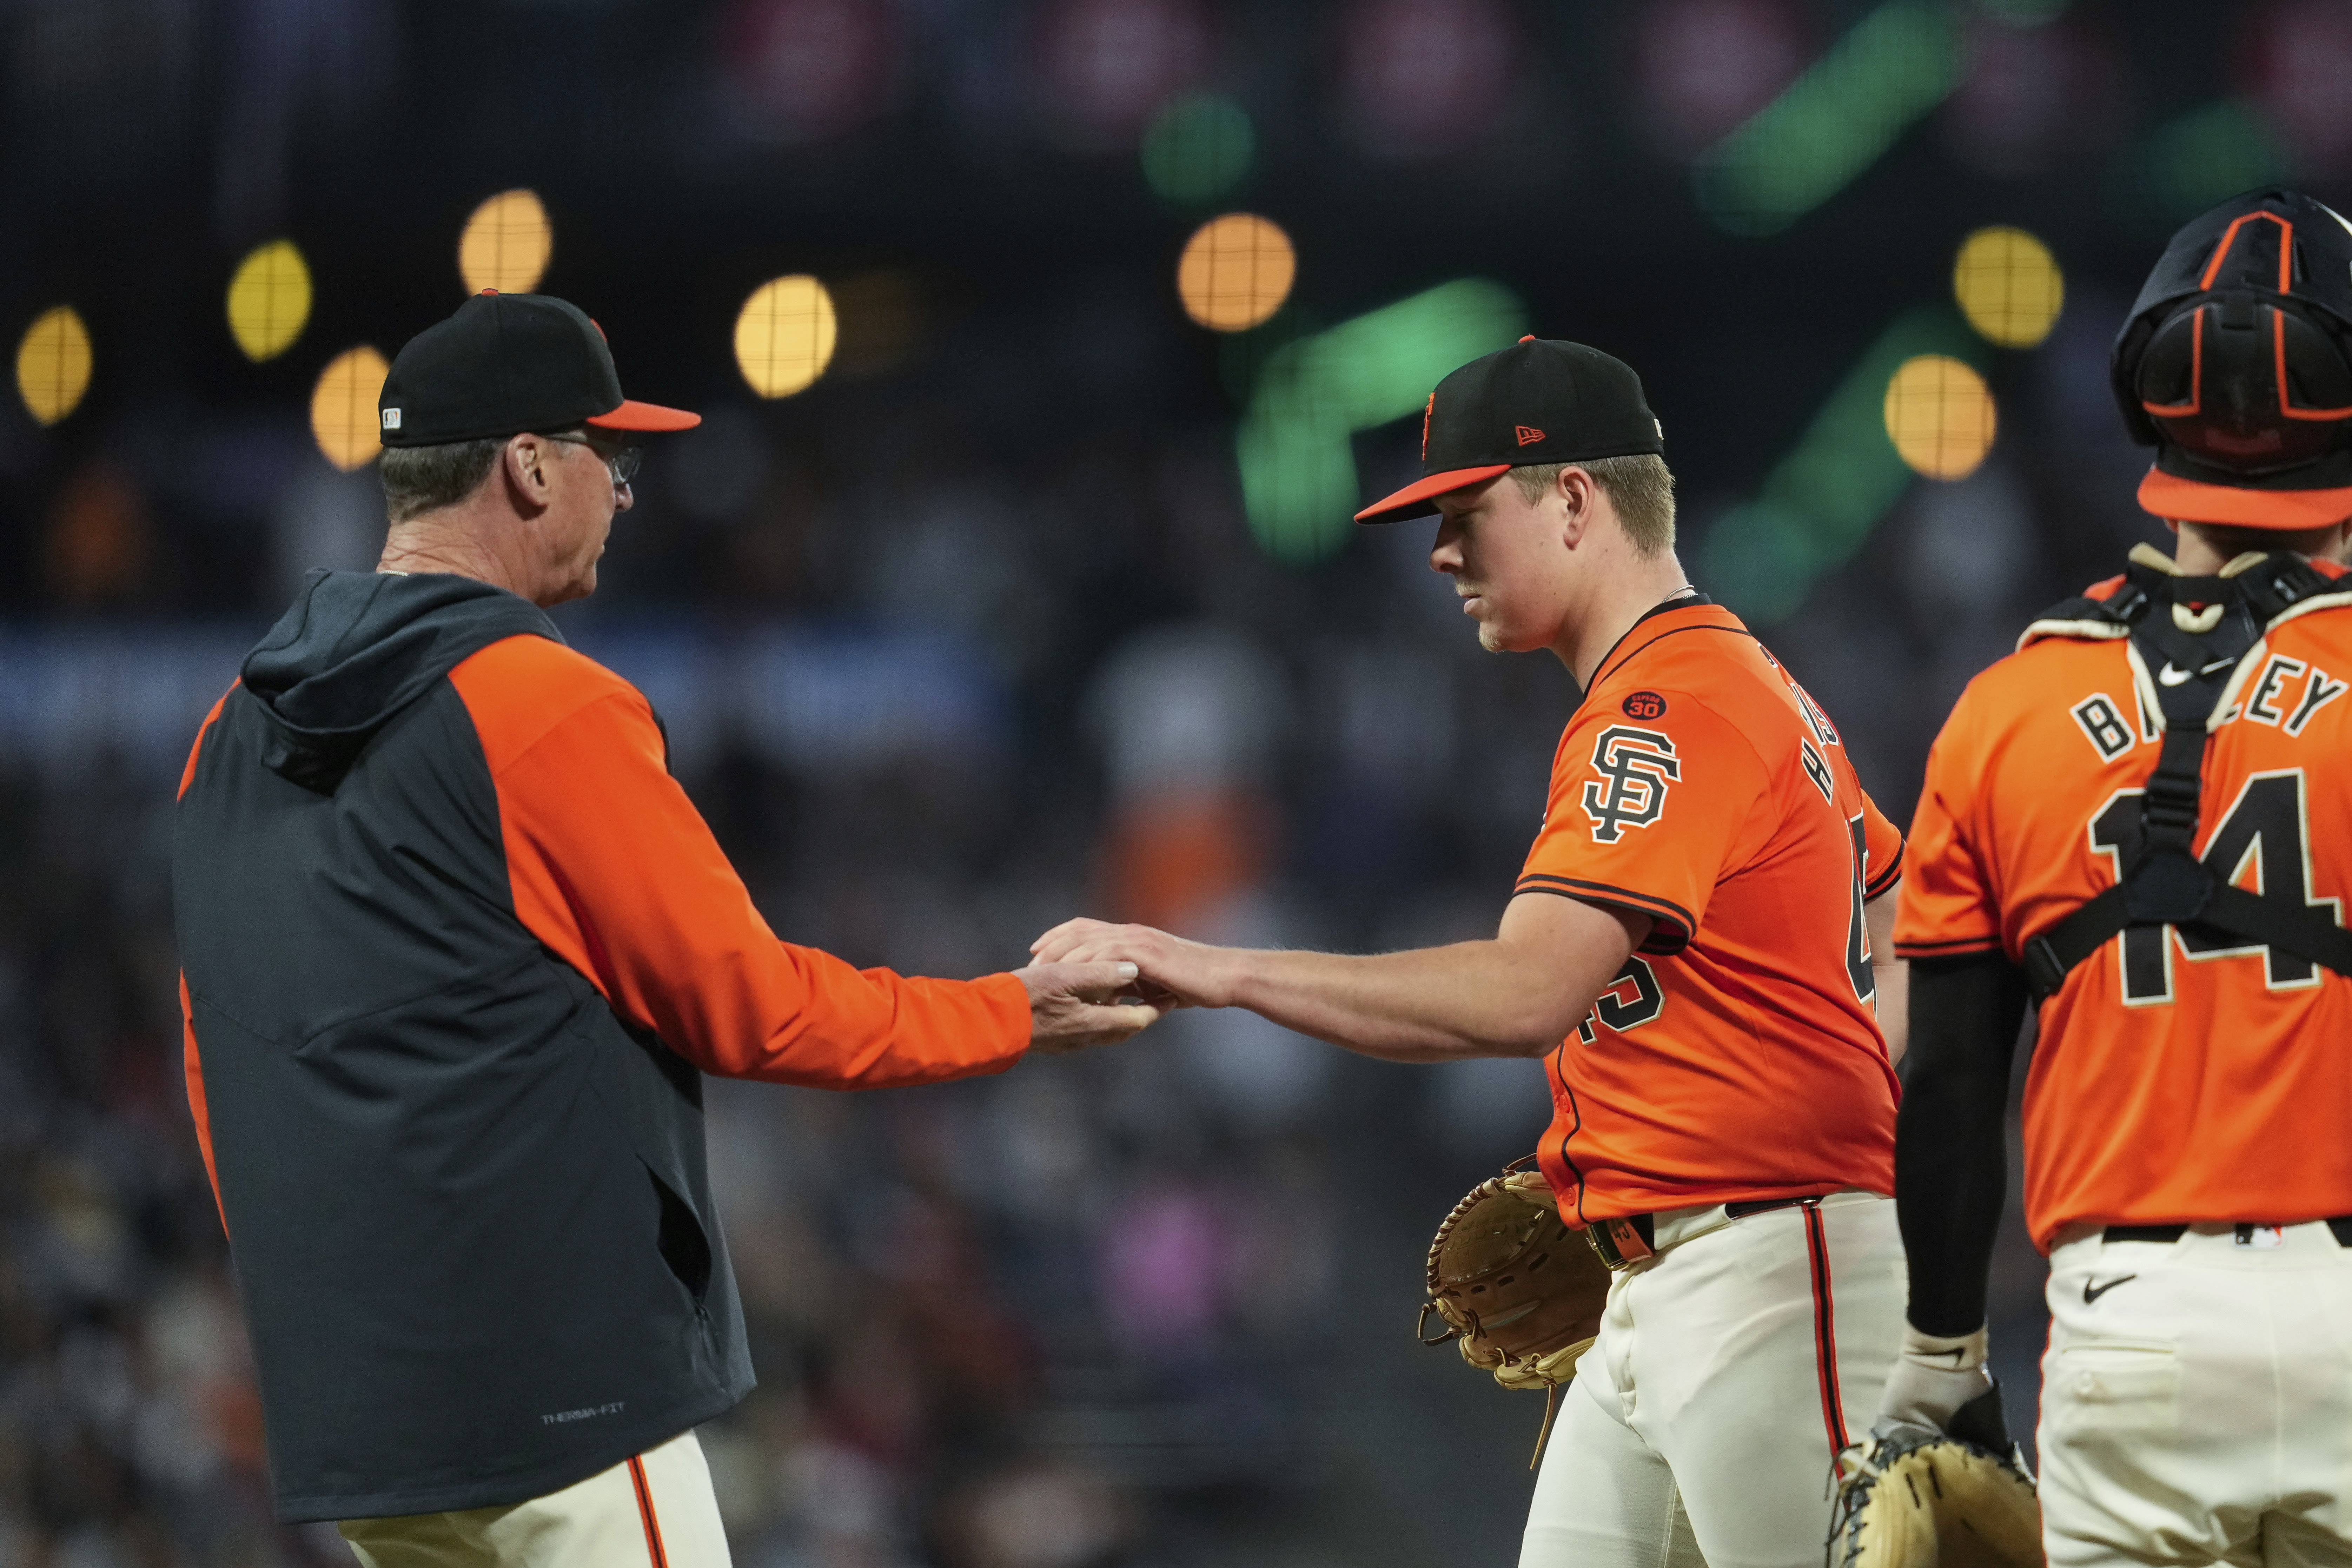 Harrison pitches five strong innings, Wisely has three hits in Giants' 7-1 win over Twins